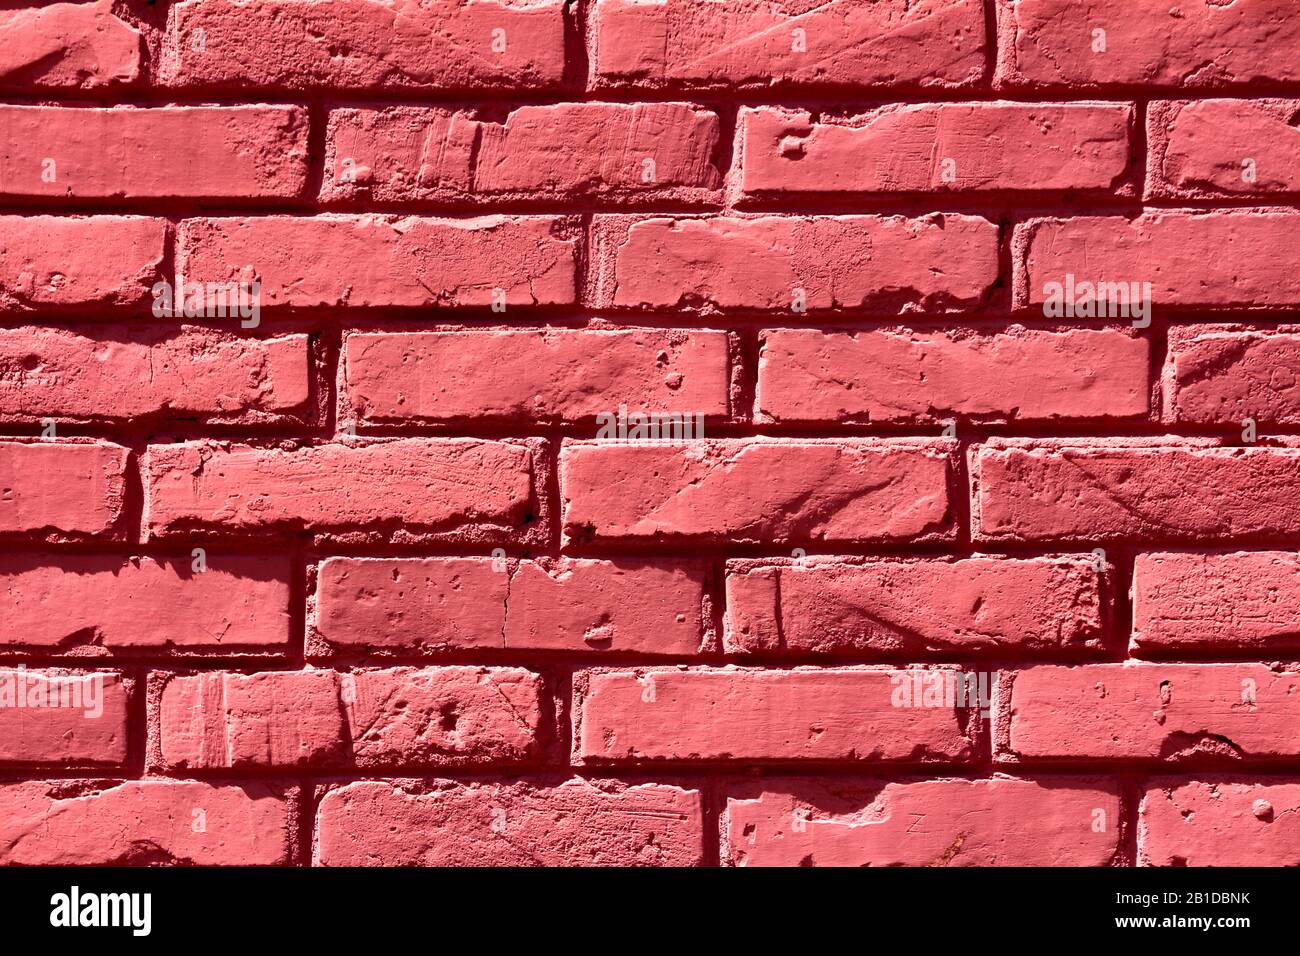 Freshly painted dark red to cherry color cracked damaged bricks